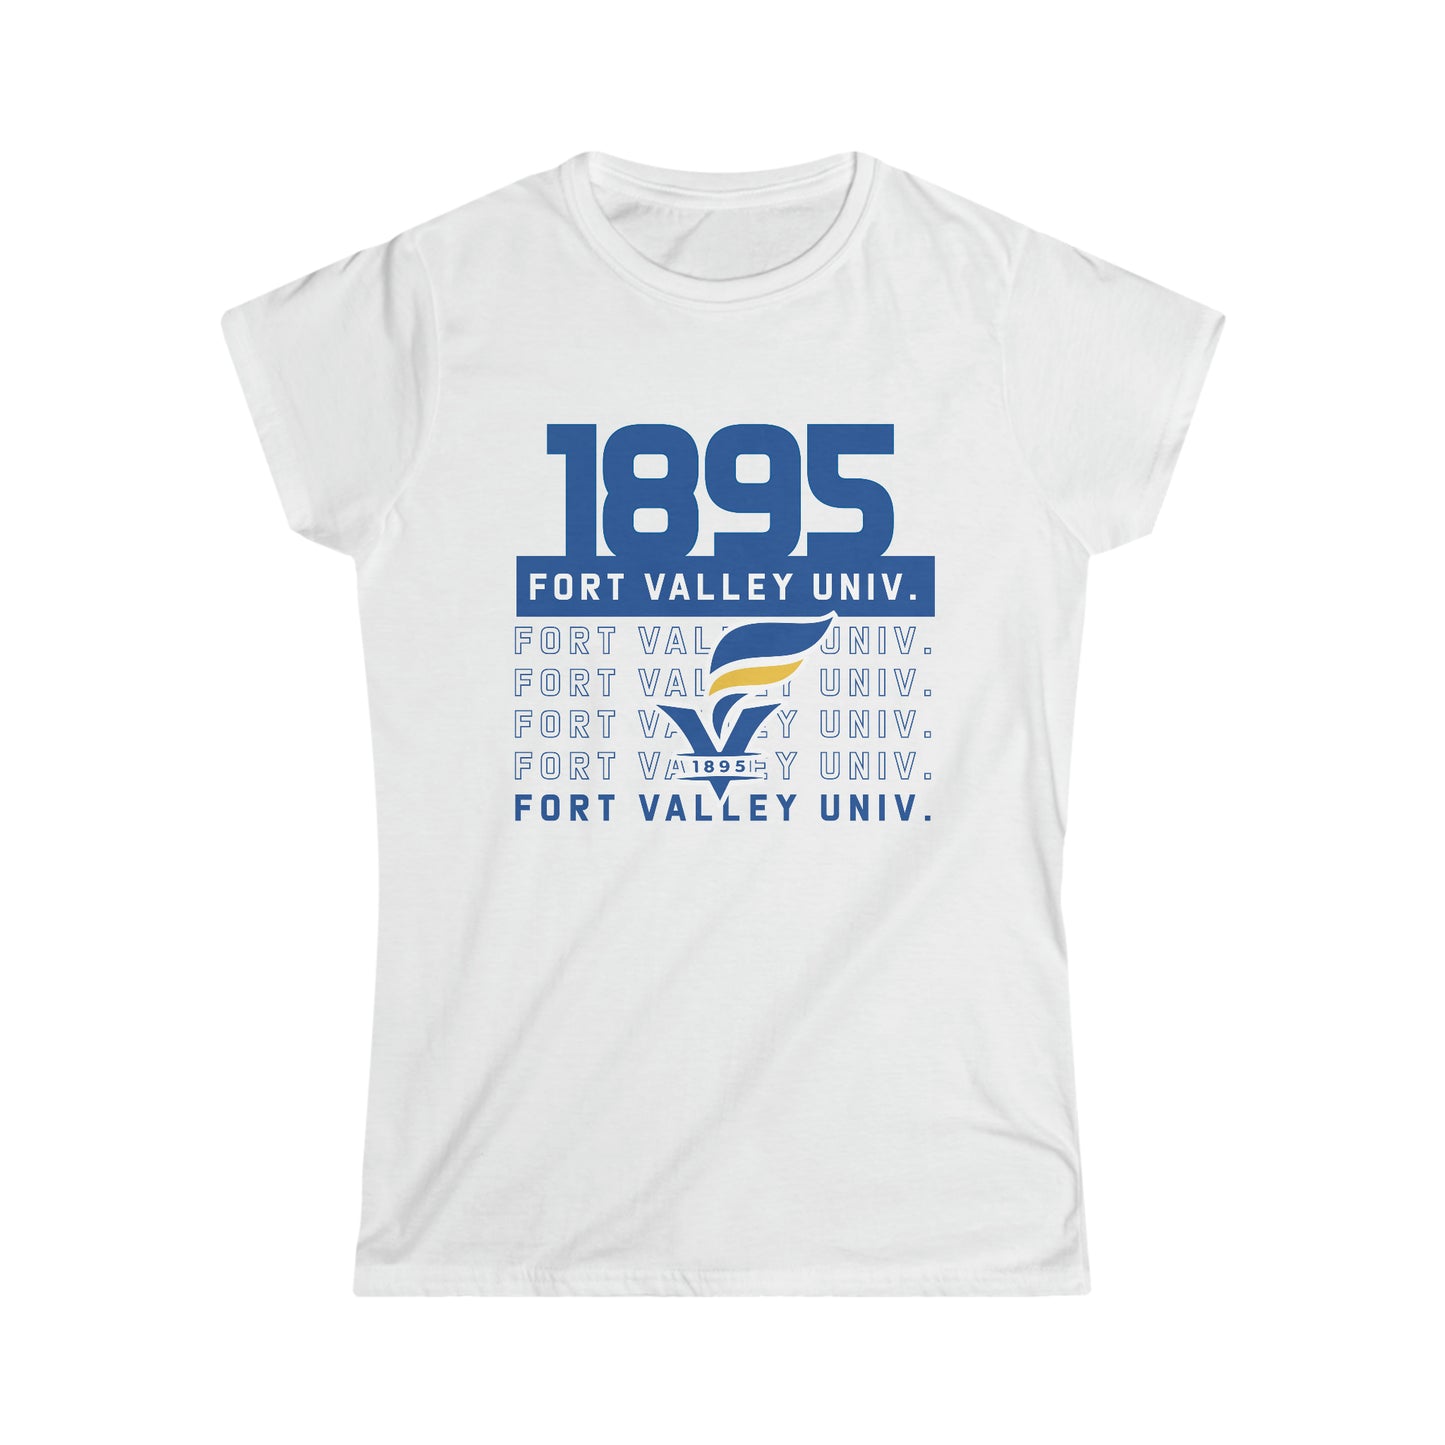 HBCU Love (Fort Valley State University 1895/ Women's Softstyle Tee)